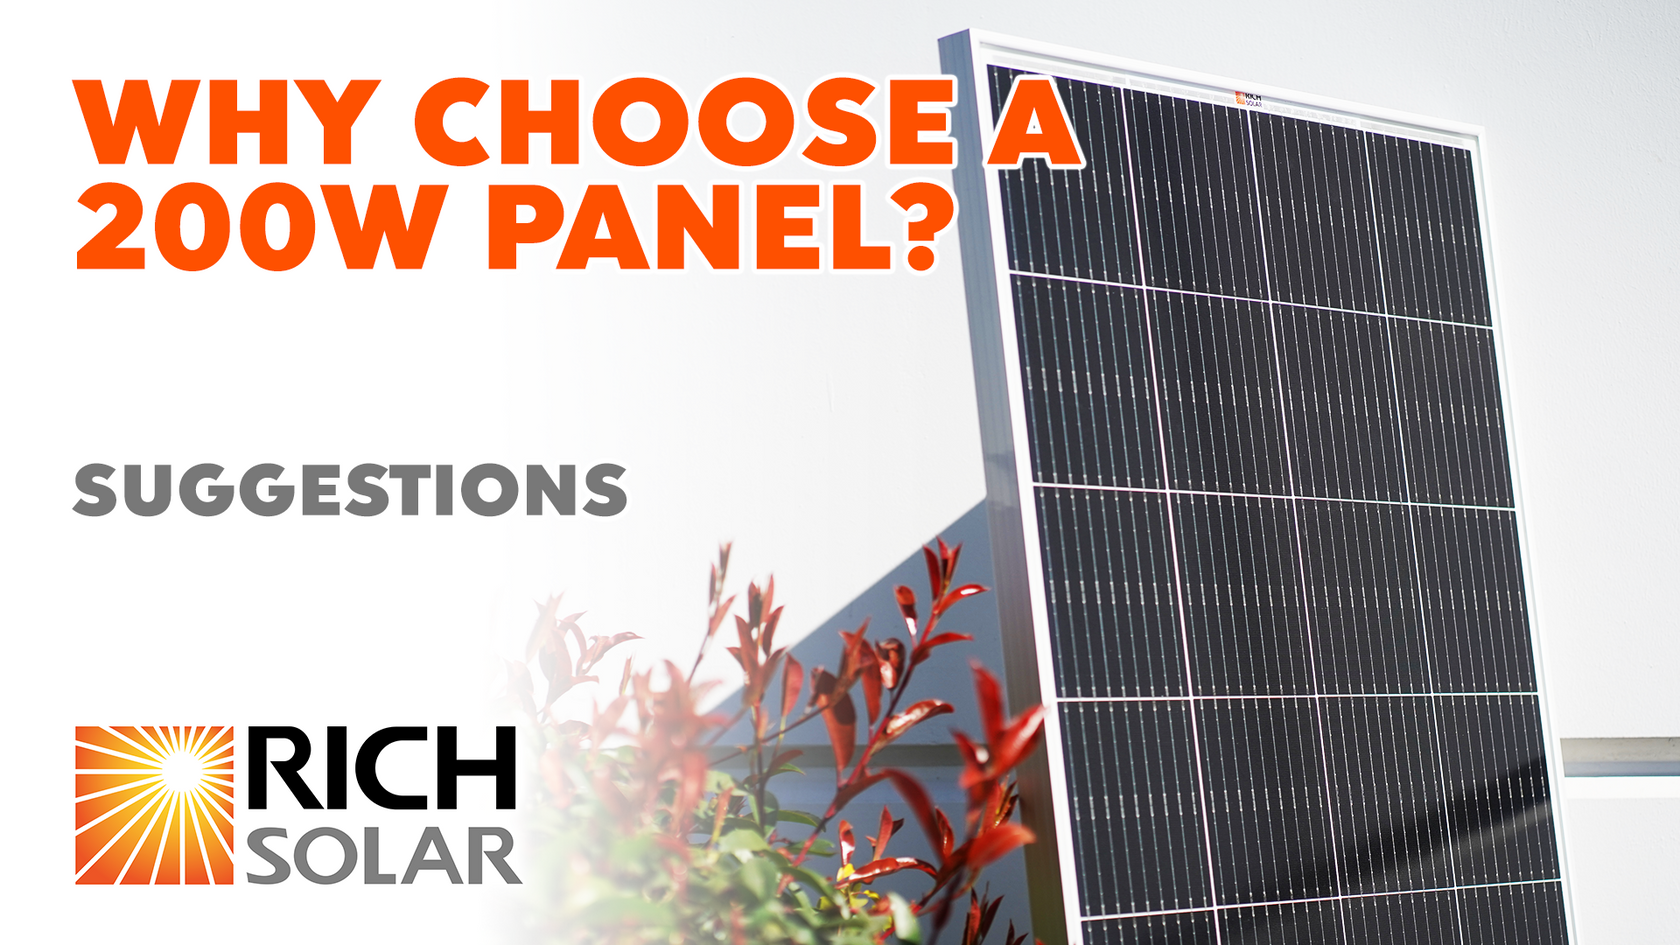 Infographic on why to choose a 200W panel from RICH SOLAR detailing benefits and features for informed decision-making.